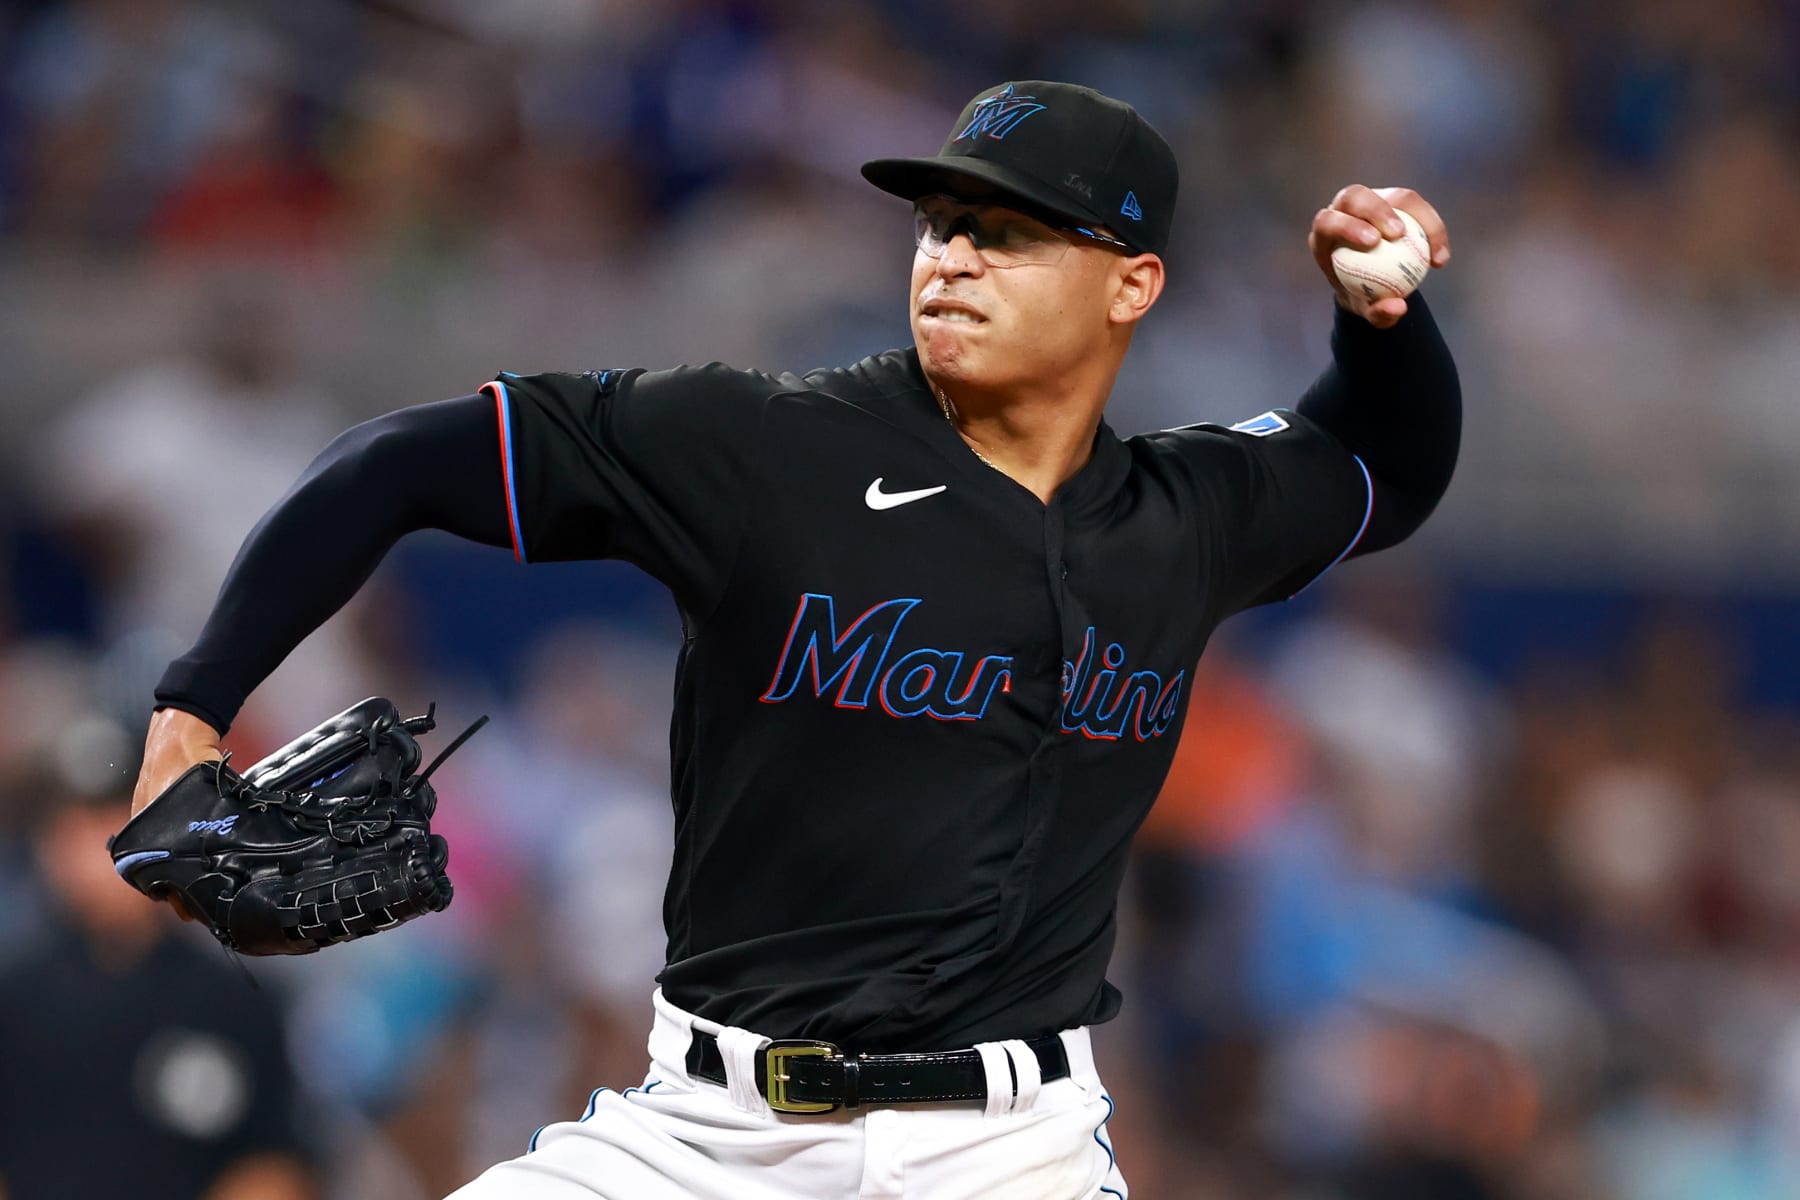 Adbert Alzolay lives up to the hype, giving the Cubs a homegrown pitcher to  dream about - The Athletic